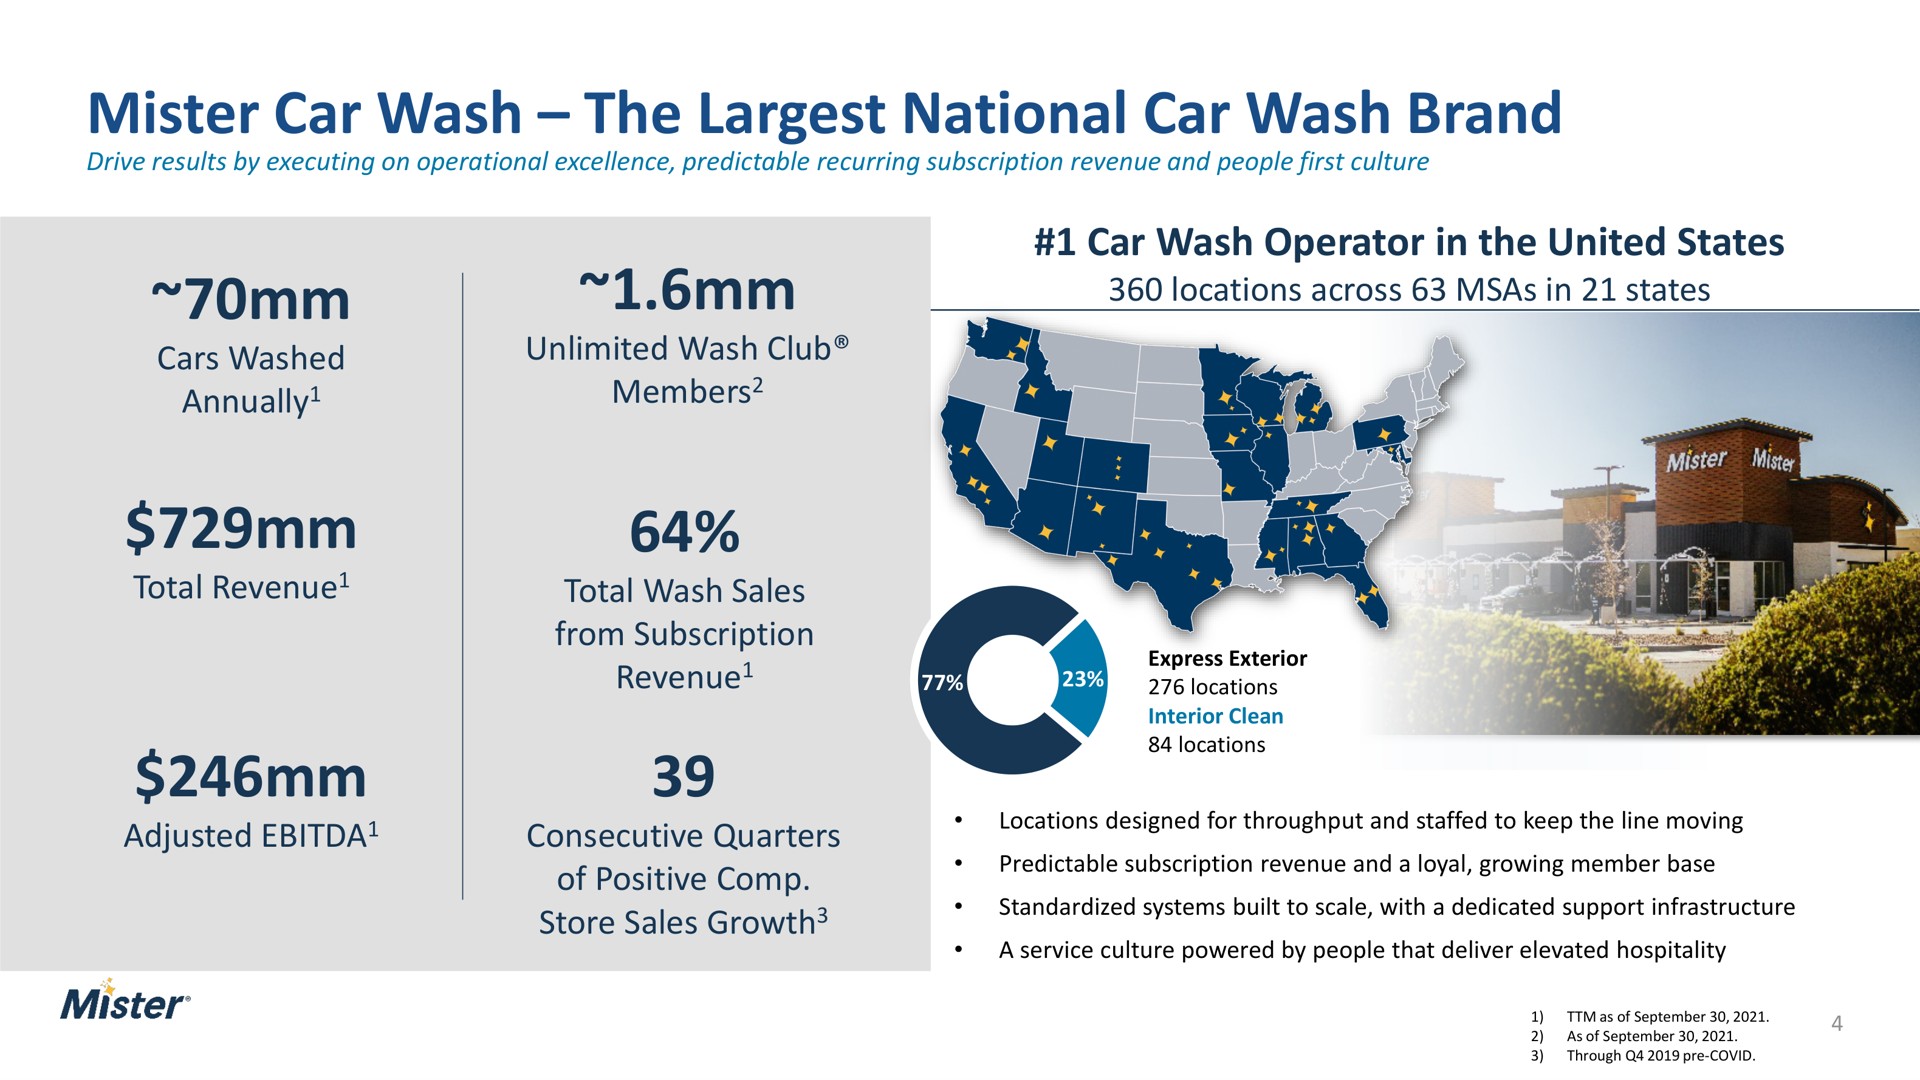 mister car wash the national car wash brand cars washed annually total revenue adjusted unlimited wash club members total wash sales from subscription revenue consecutive quarters of positive store sales growth car wash operator in the united states locations across in states annually revenue revenue | Mister Car Wash